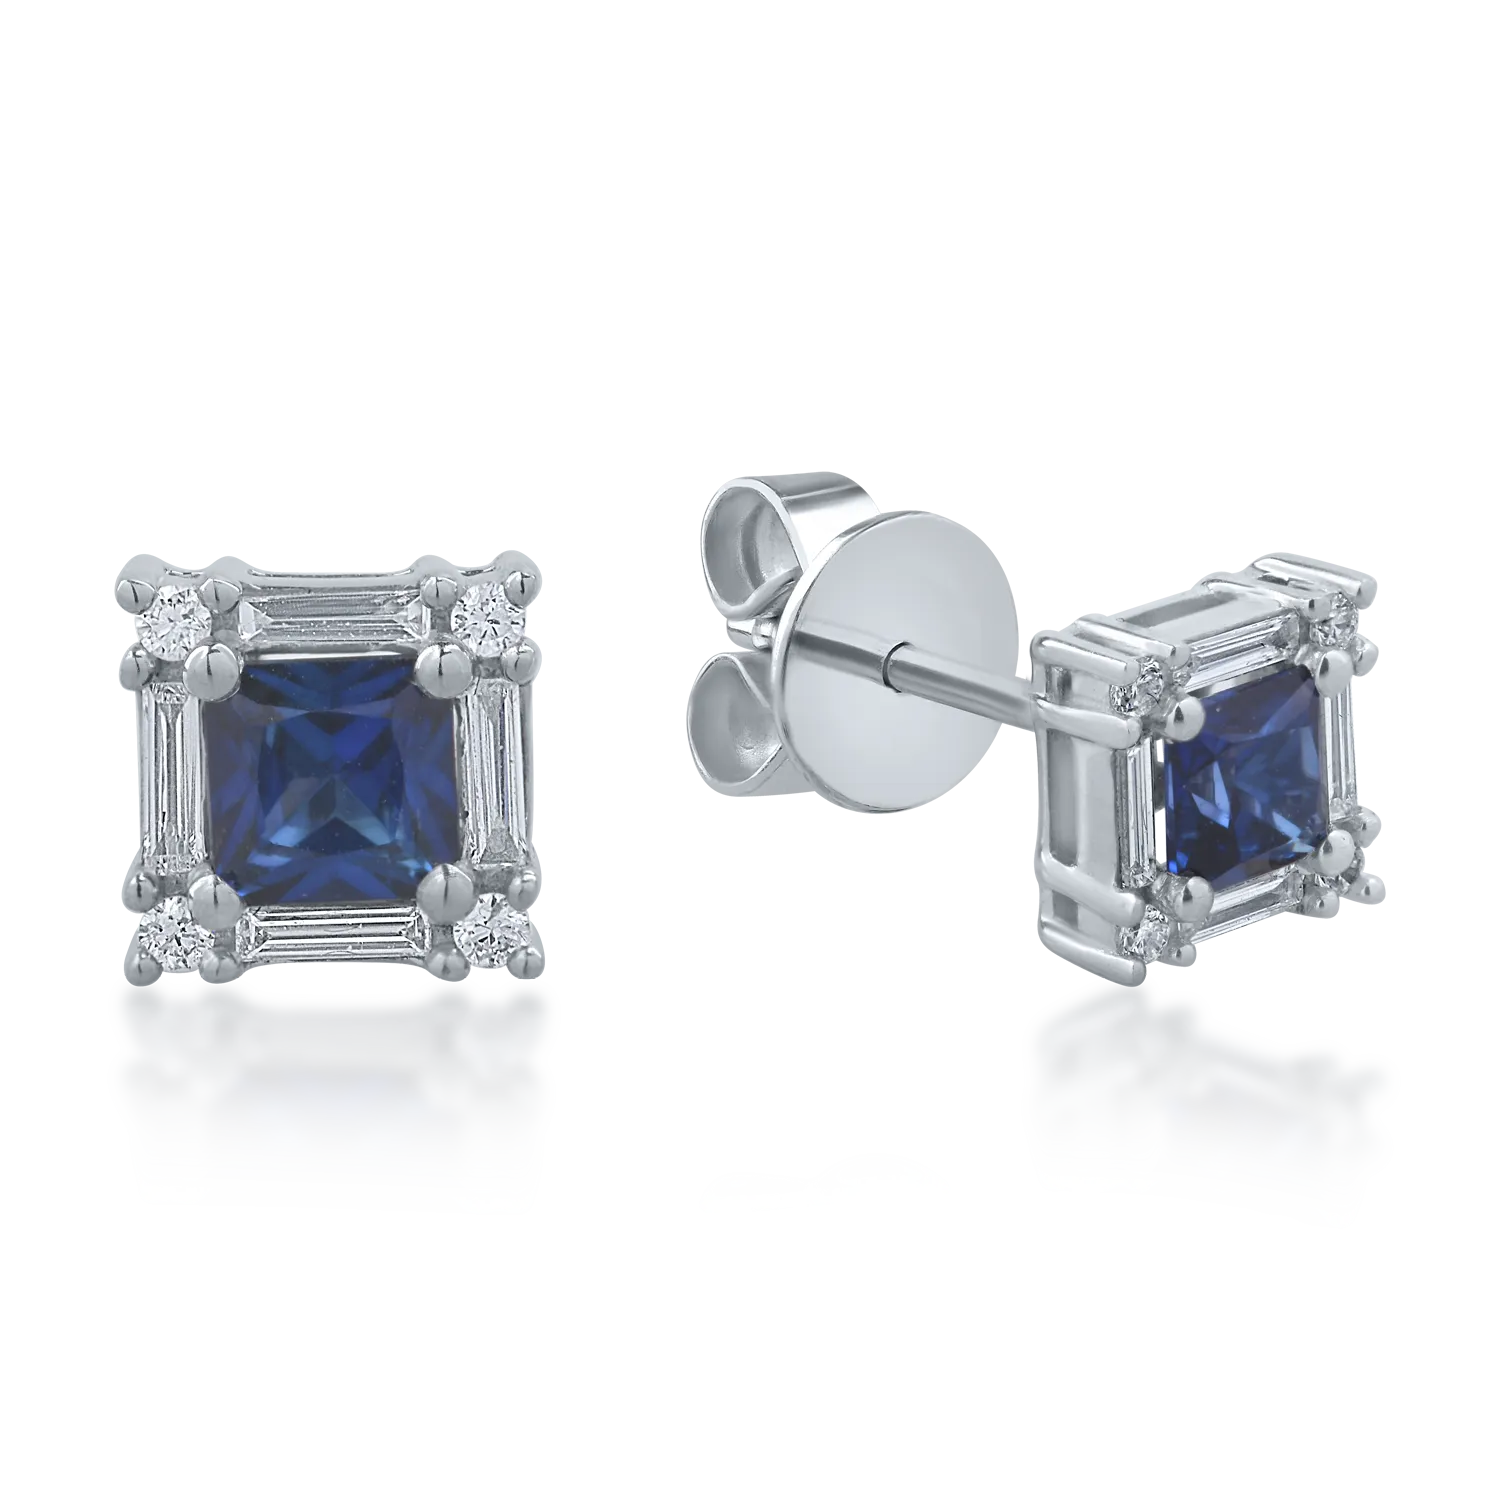 White gold earrings with 0.6ct sapphires and 0.19ct diamonds